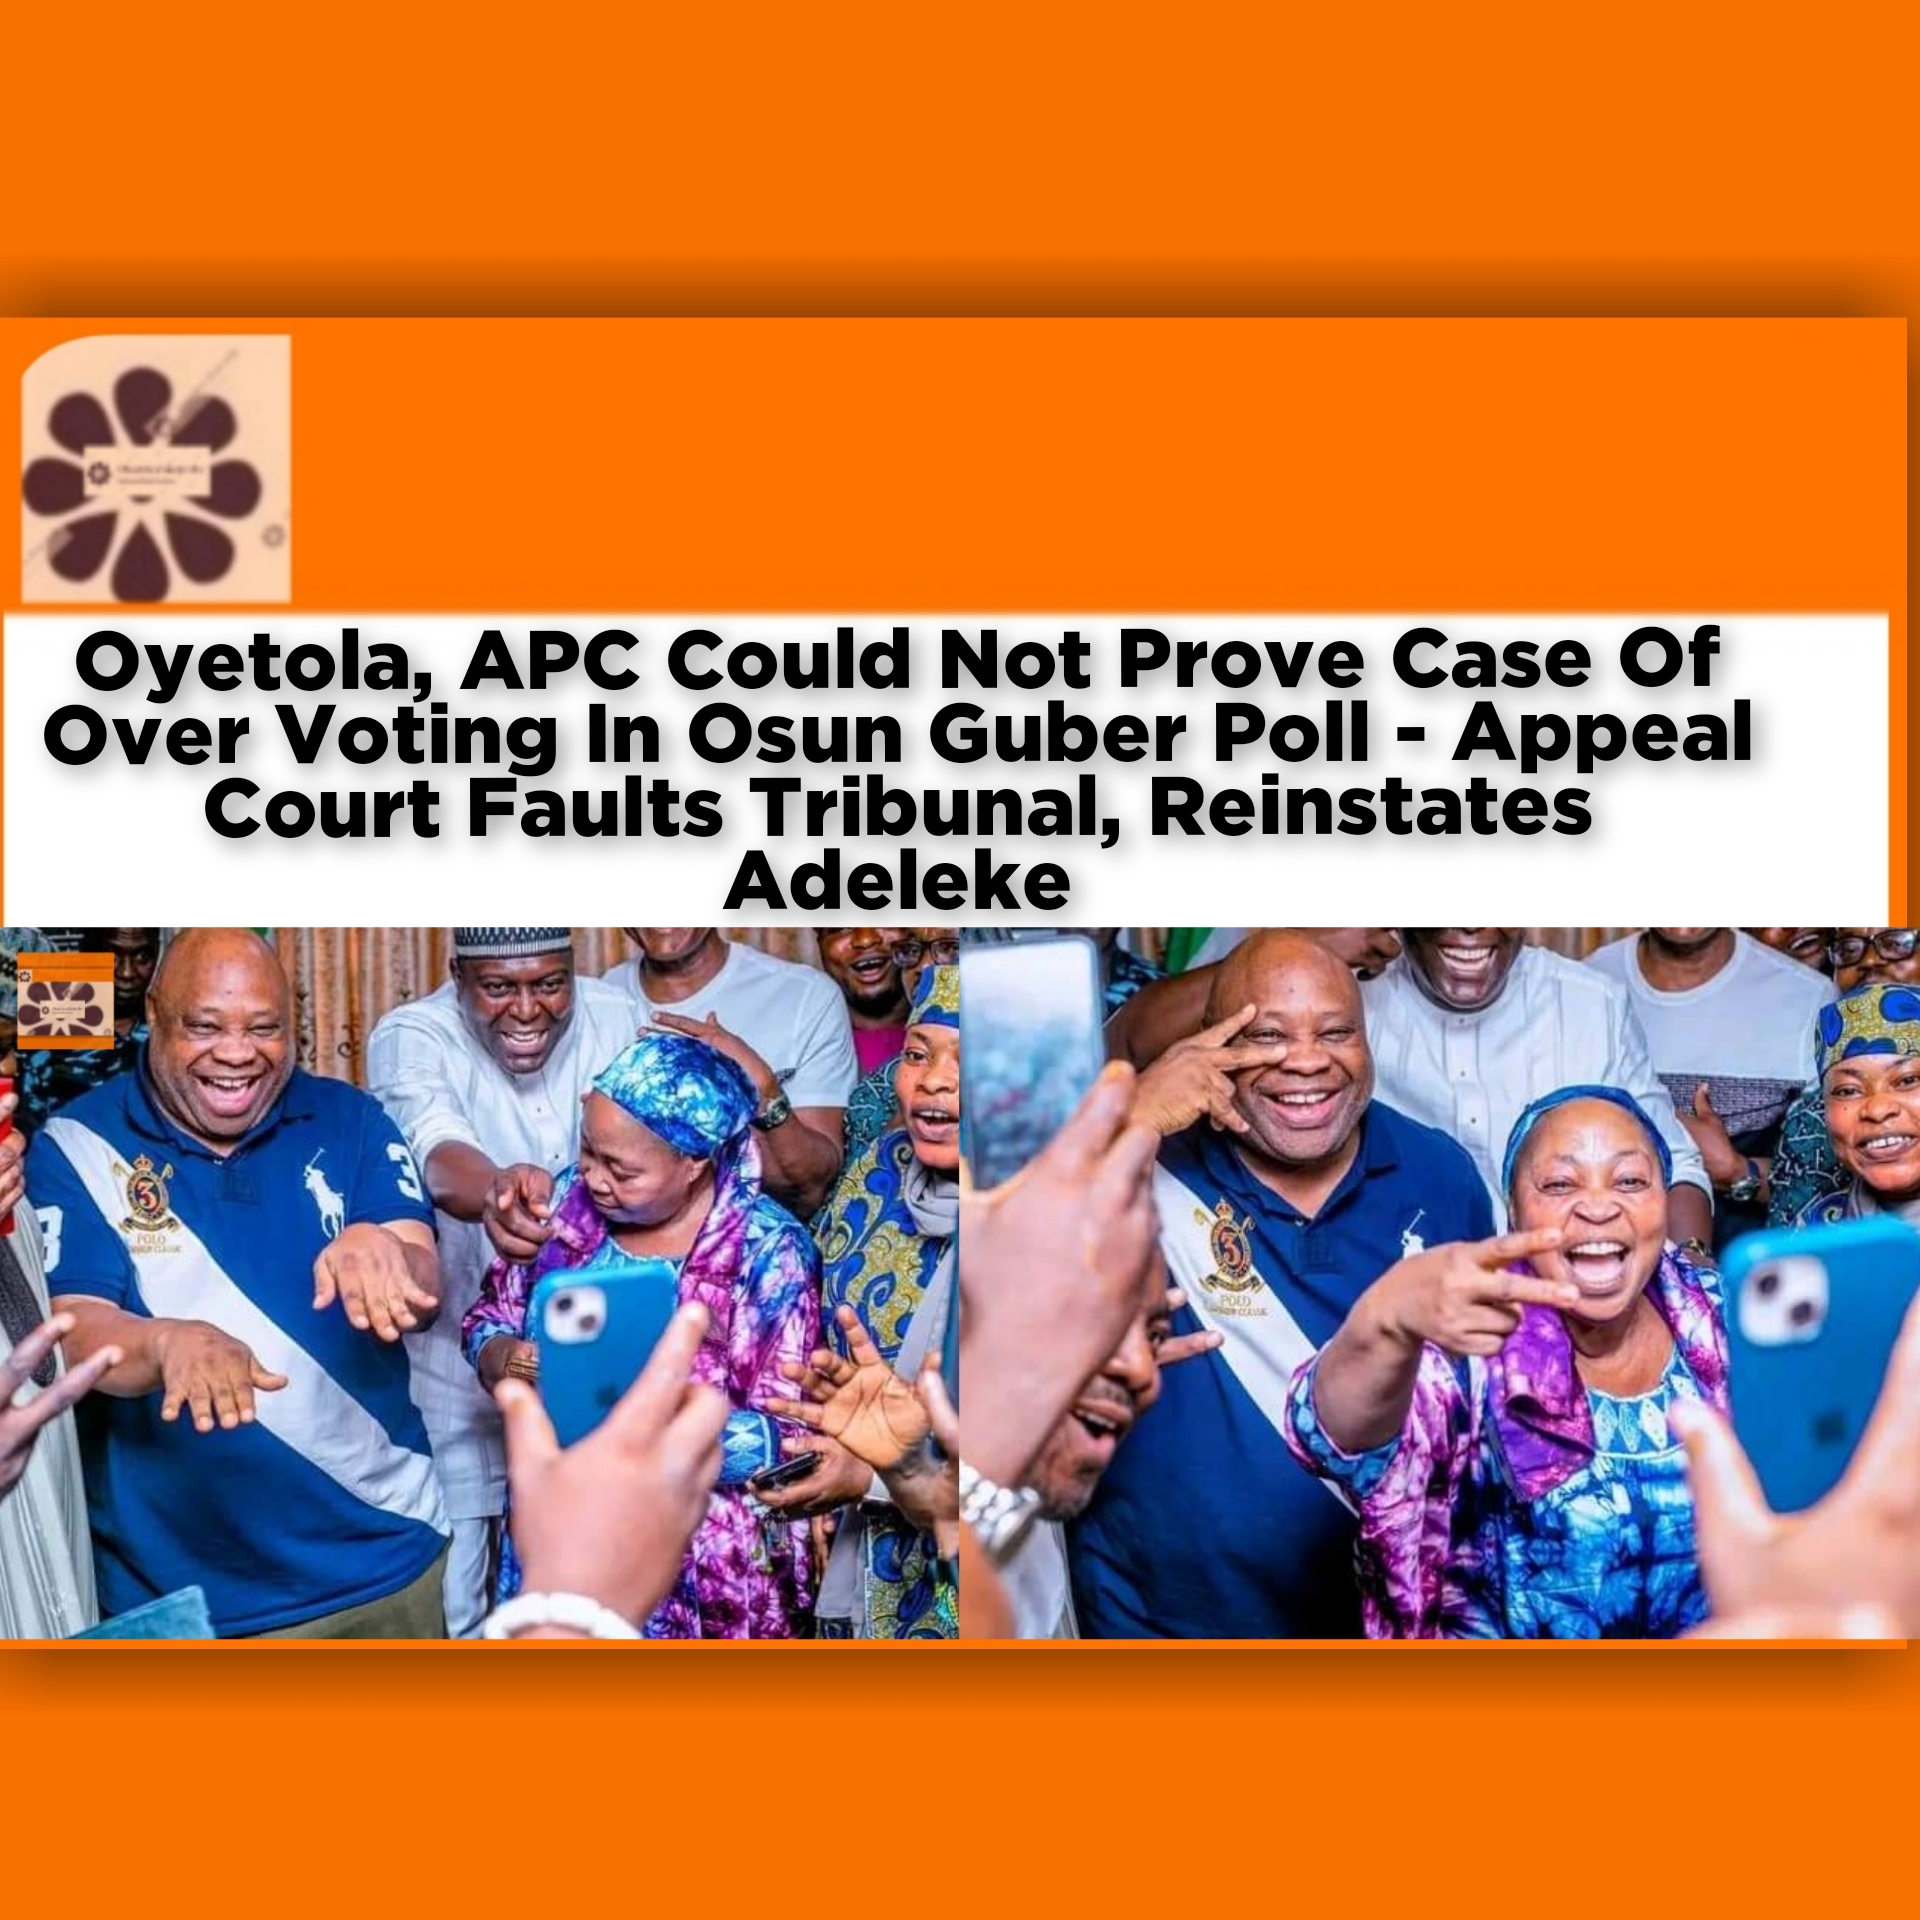 Oyetola, APC Could Not Prove Case Of Over Voting In Osun Guber Poll - Appeal Court Faults Tribunal, Reinstates Adeleke ~ OsazuwaAkonedo EFCC